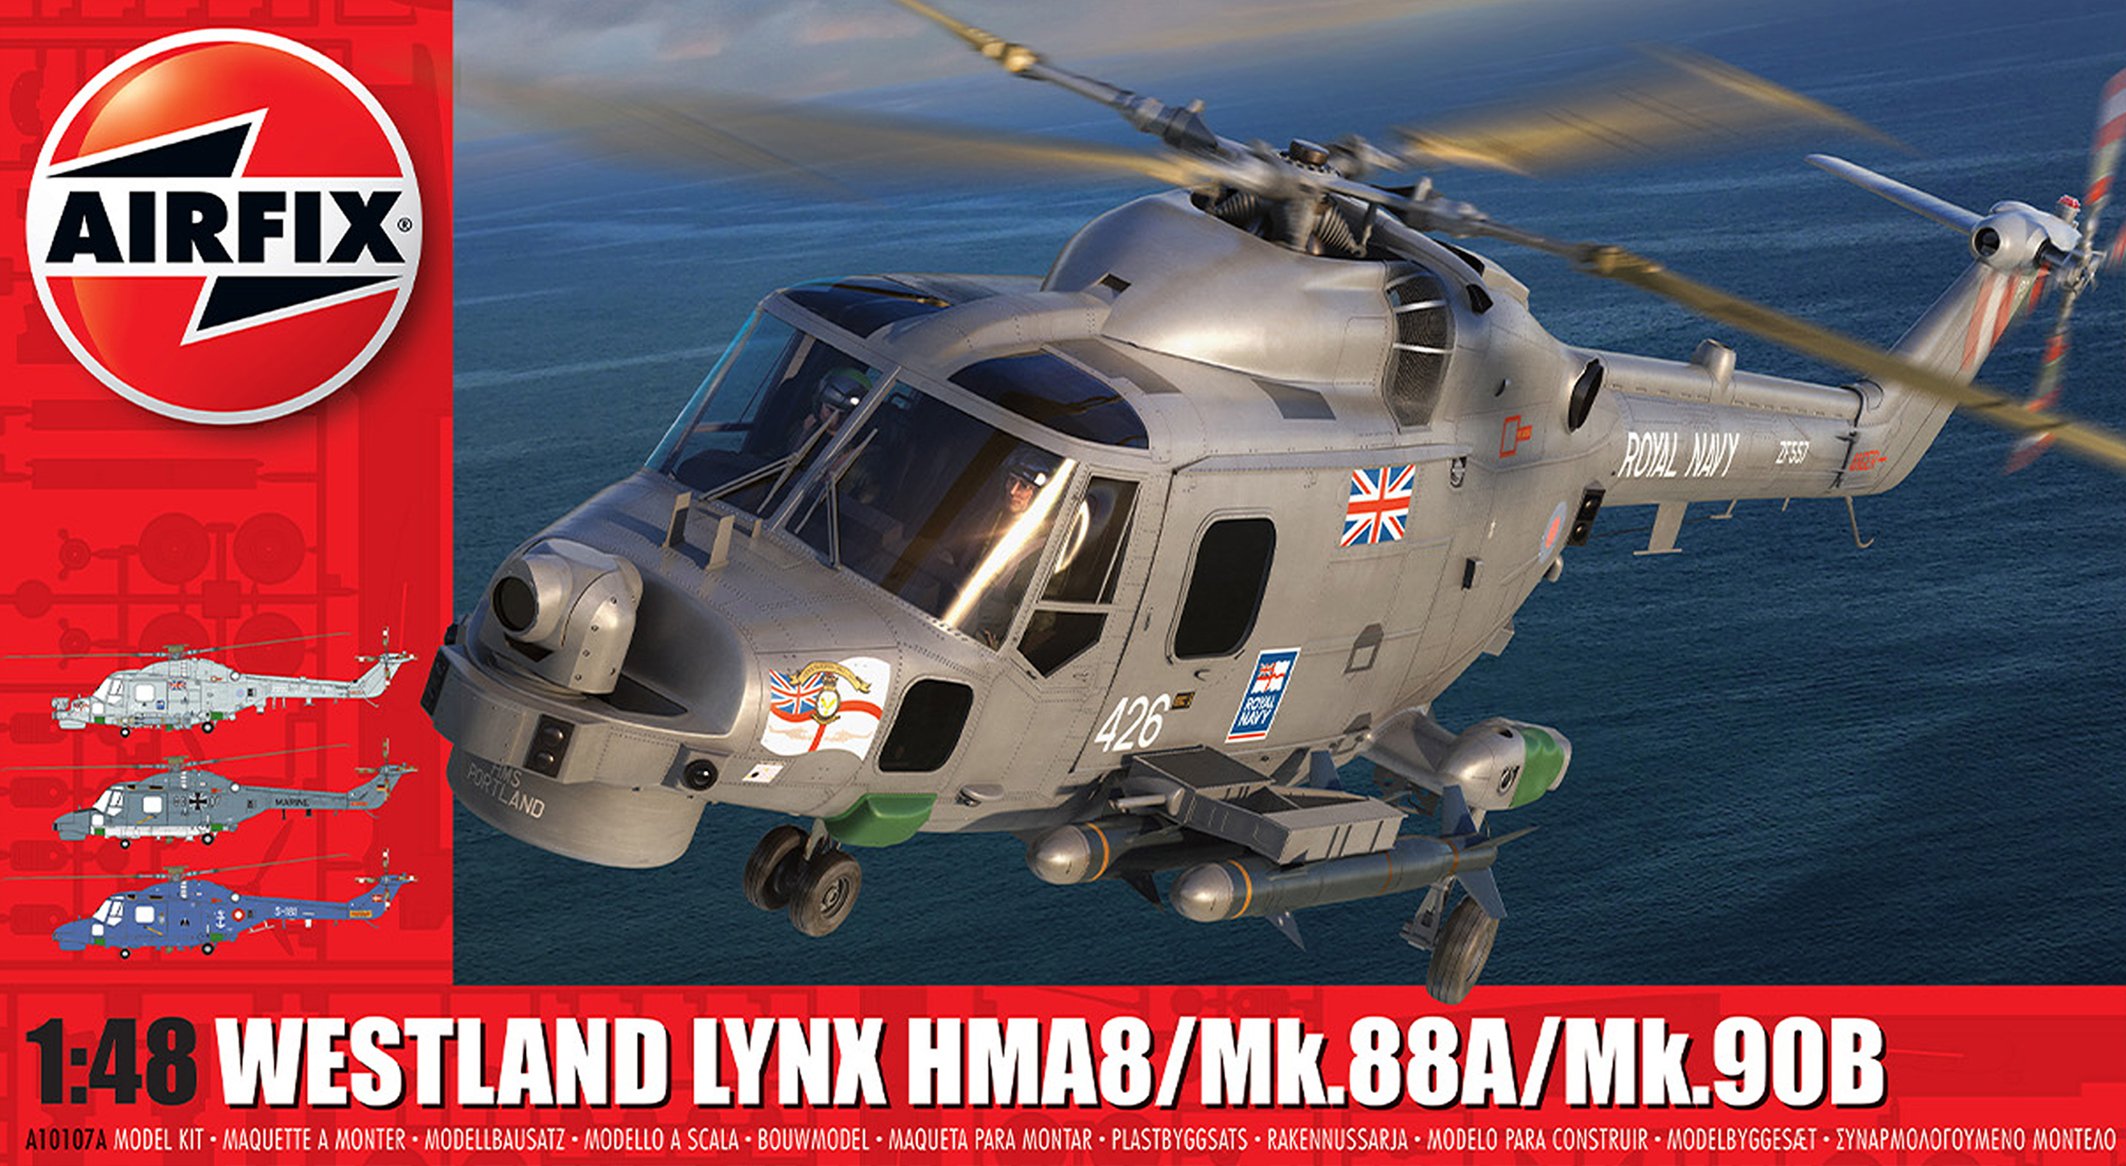 Airfix new scale model kit releases August 2022